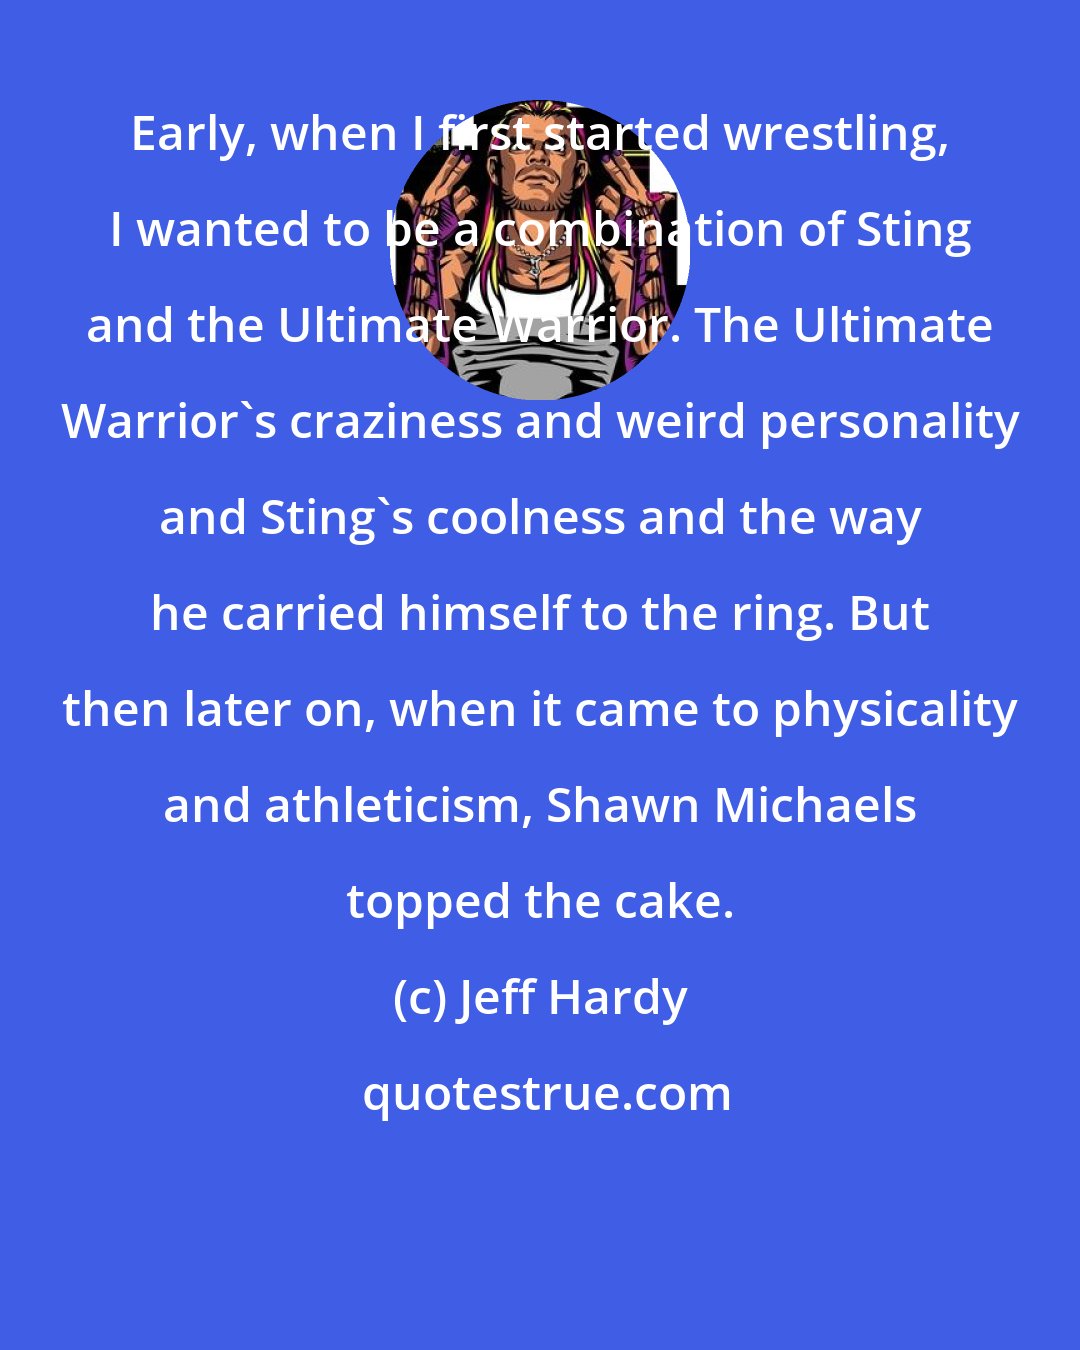 Jeff Hardy: Early, when I first started wrestling, I wanted to be a combination of Sting and the Ultimate Warrior. The Ultimate Warrior's craziness and weird personality and Sting's coolness and the way he carried himself to the ring. But then later on, when it came to physicality and athleticism, Shawn Michaels topped the cake.